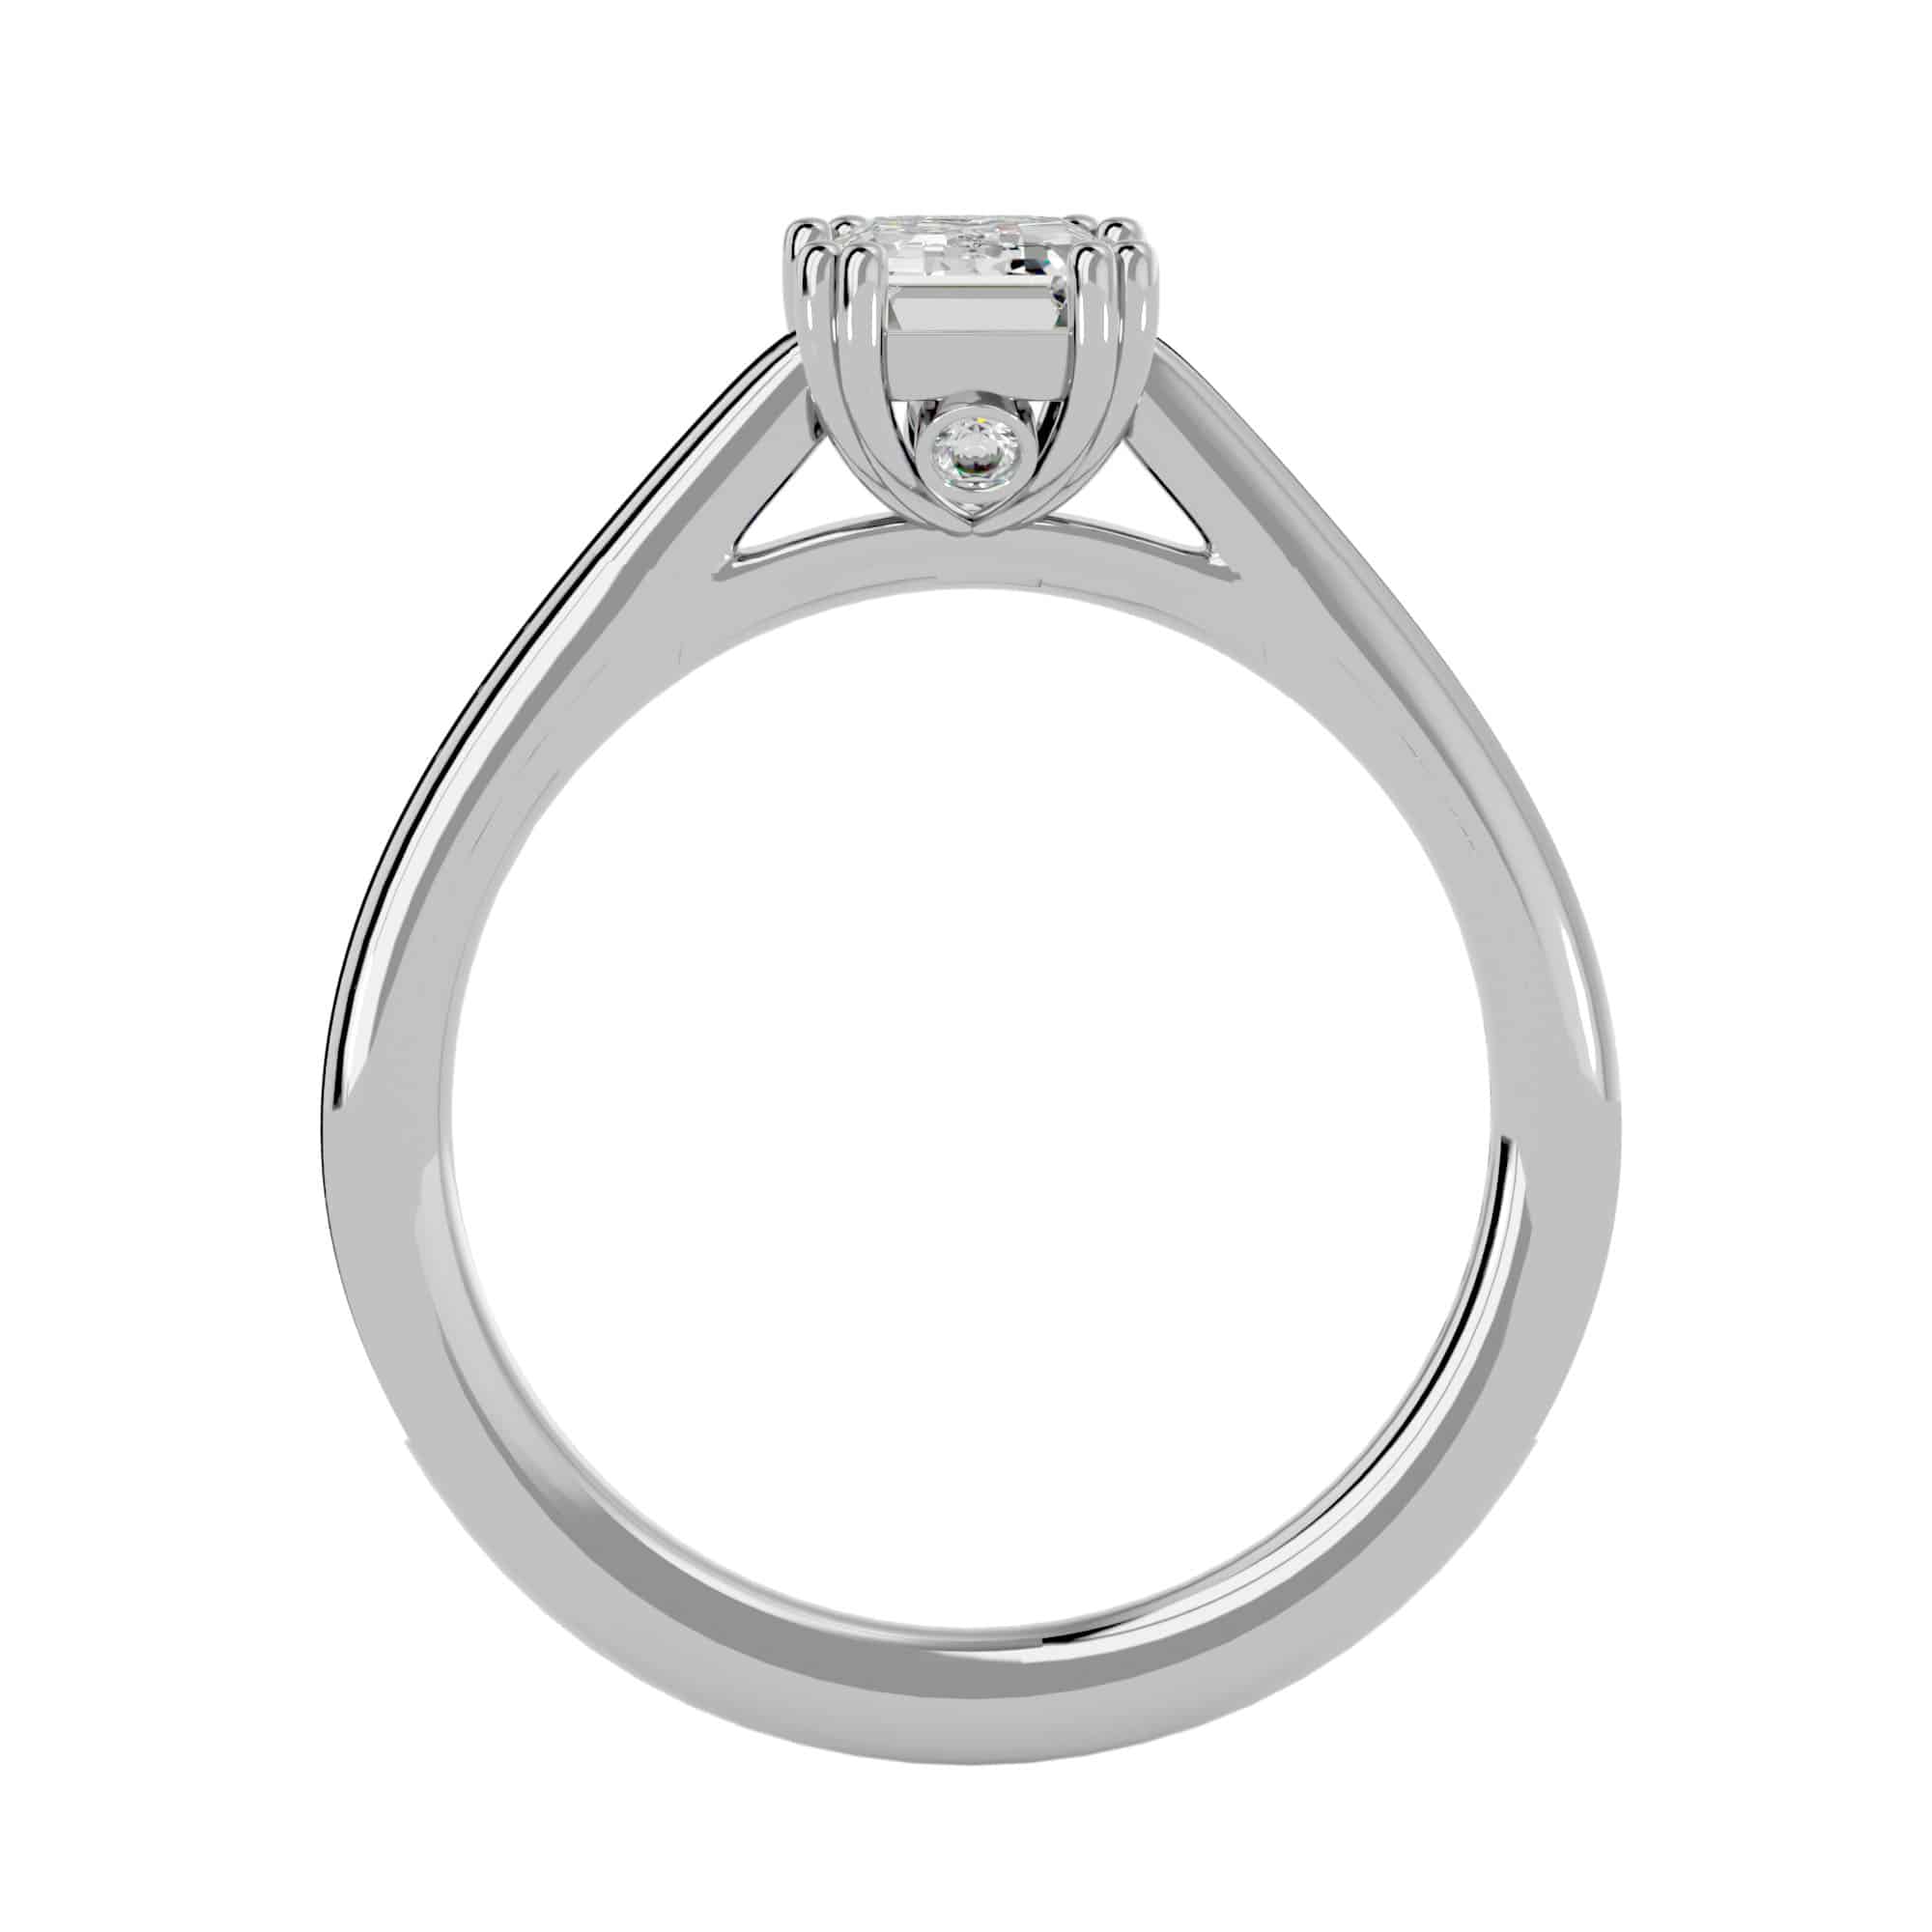 RX Emerald Cut Diamond Solitaire Engagement Ring